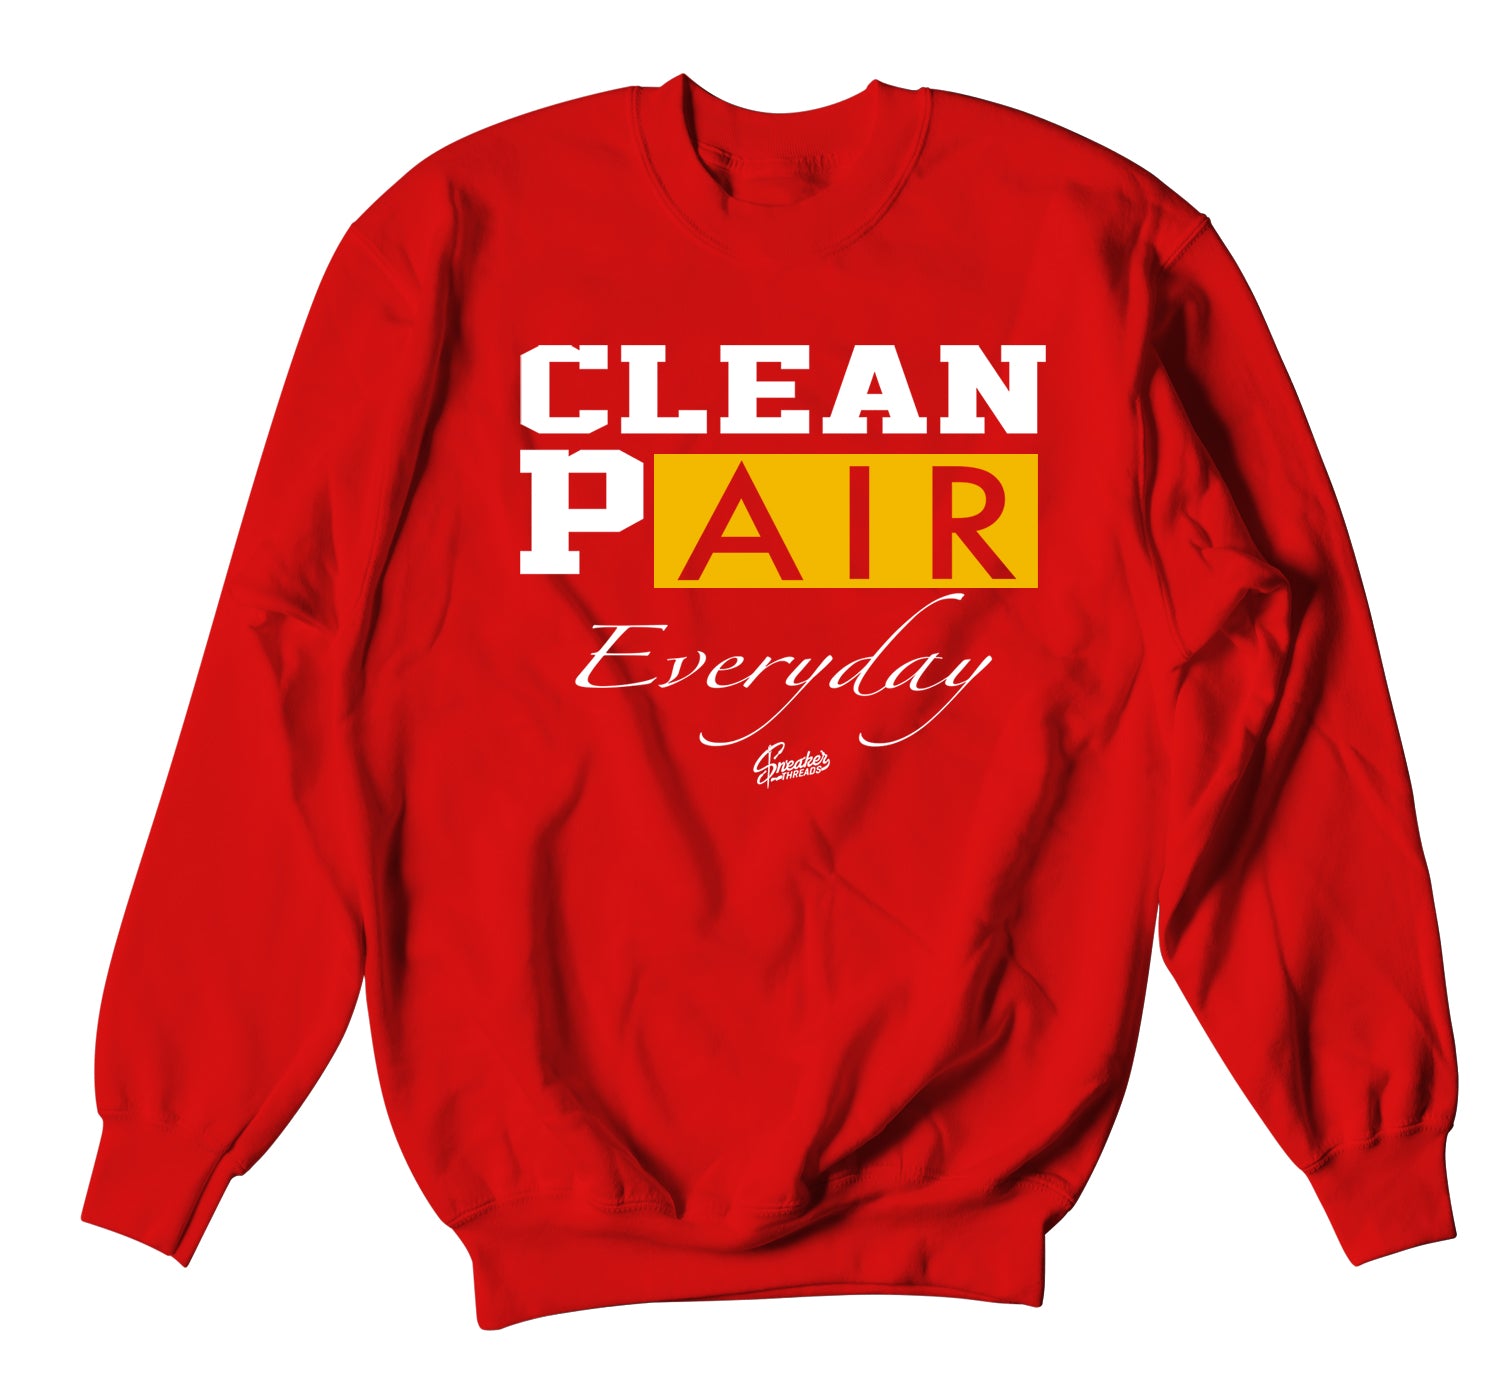 All Star 2020 Trophies Sweater  - Everyday - Red